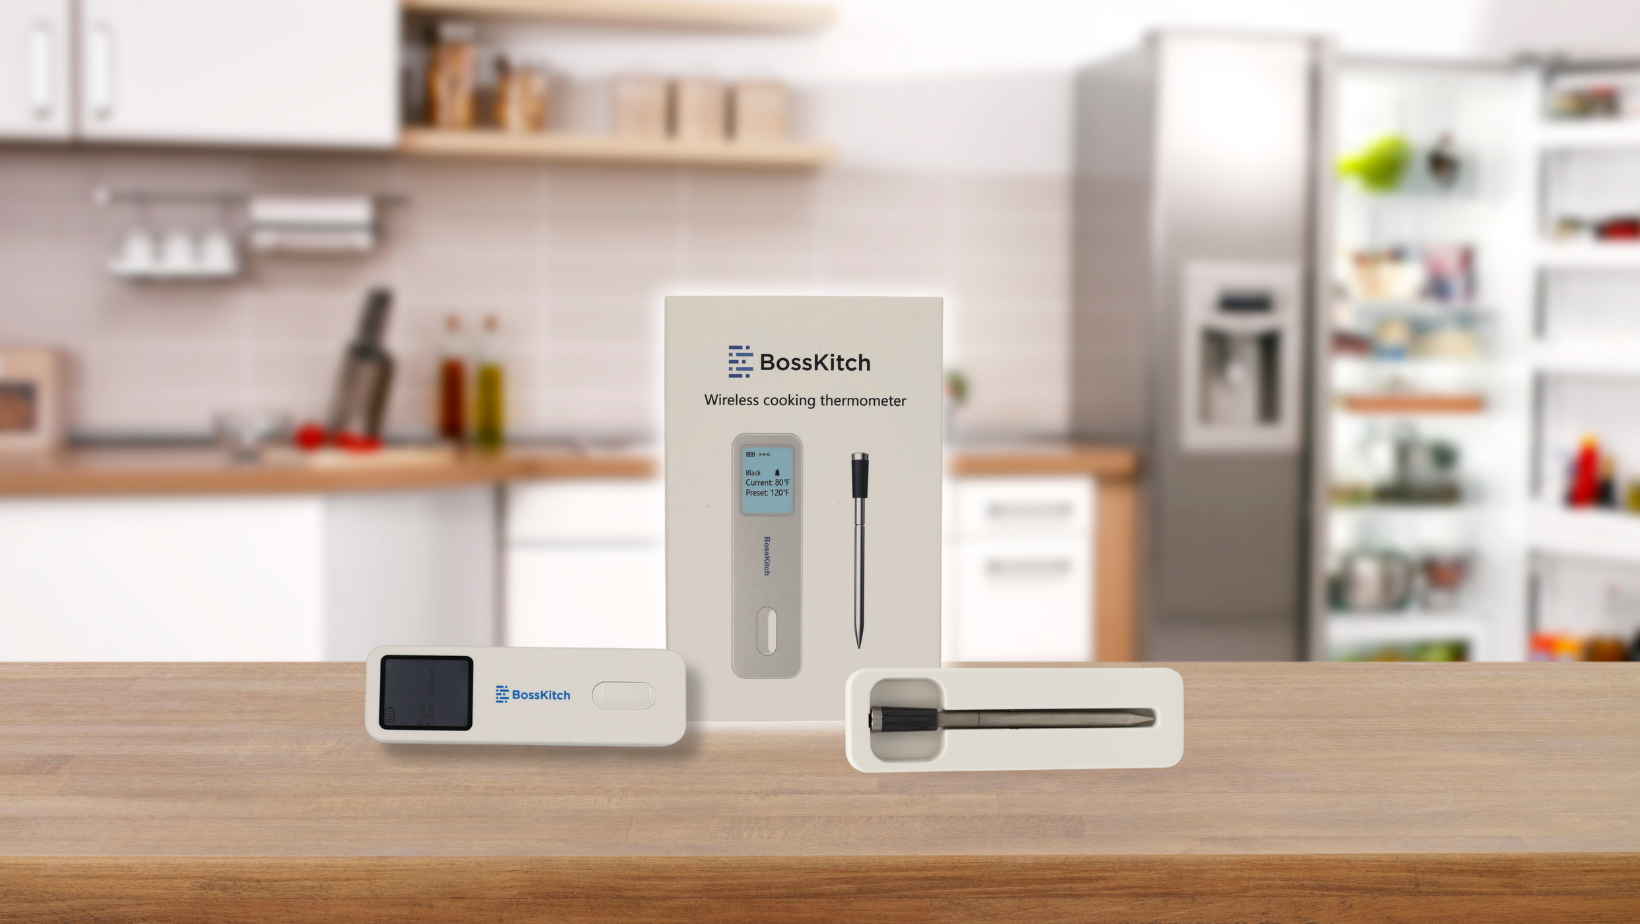 Complete BossKitch packaging for wireless cooking thermometer on an urban kitchen counter